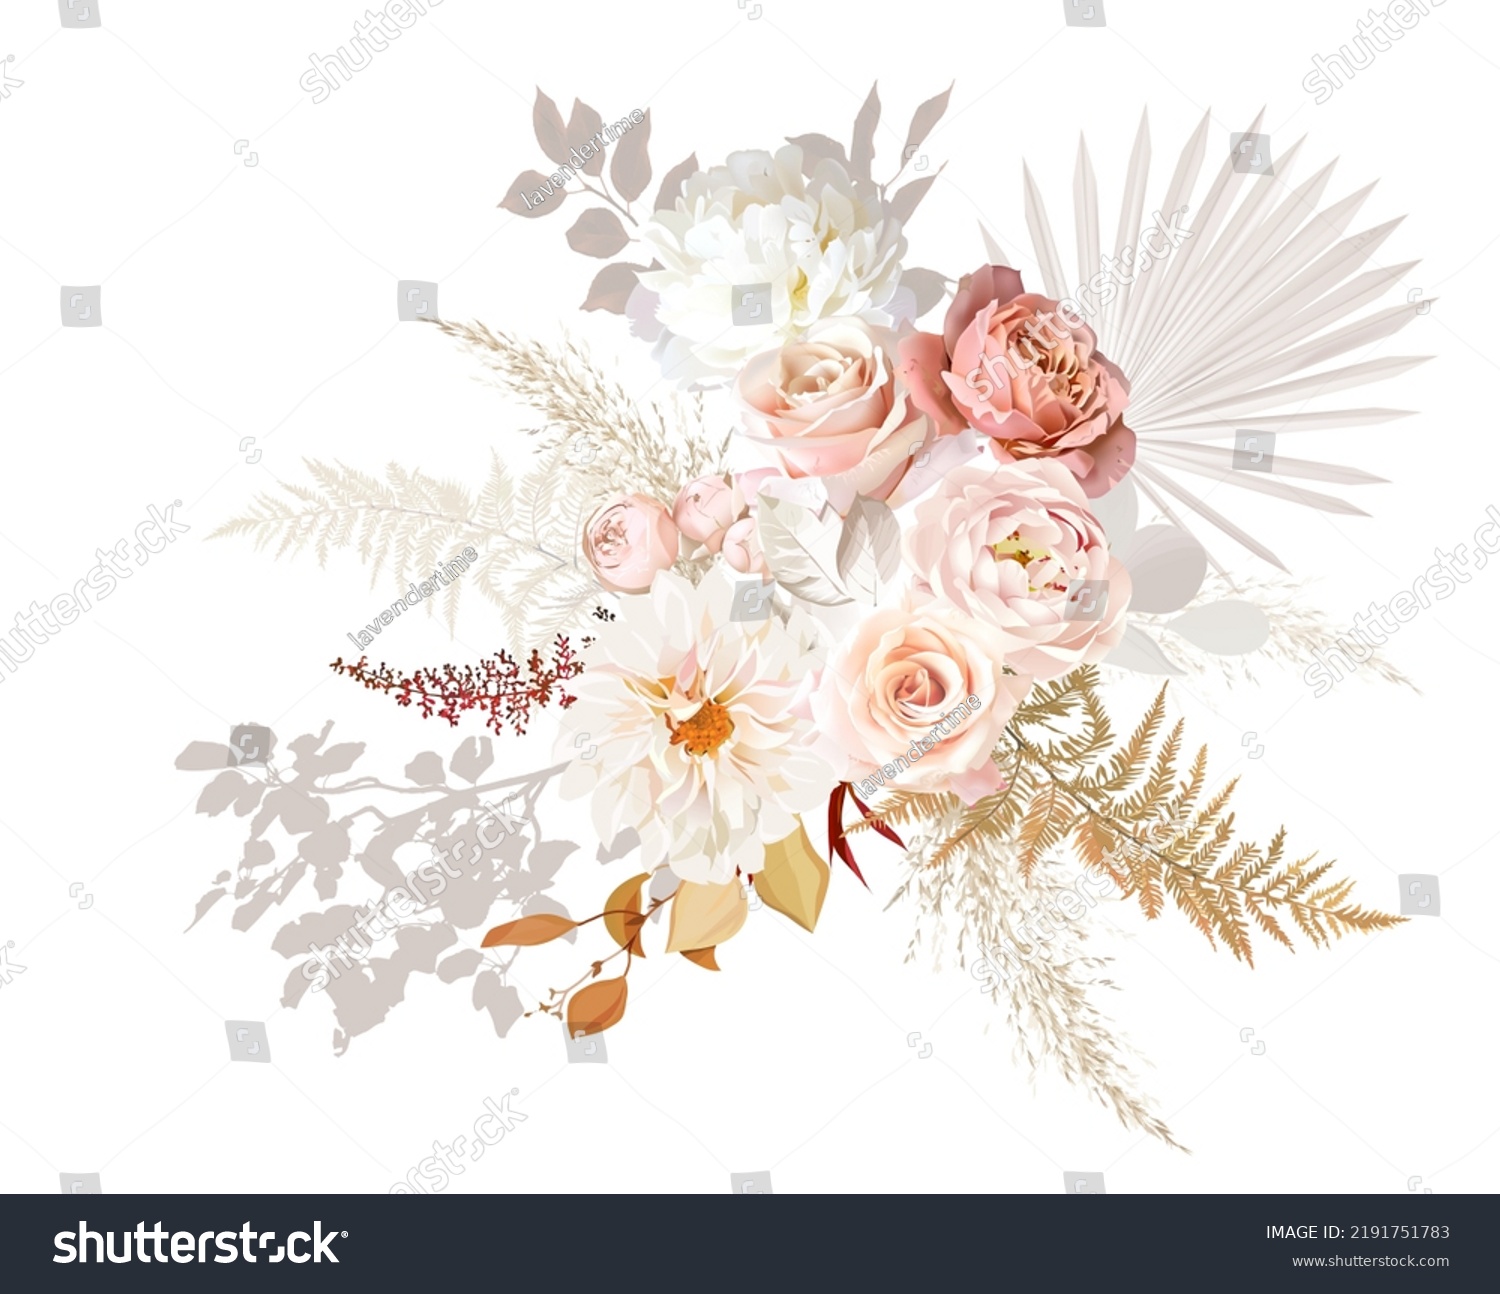 Rust orange and blush pink antique rose, beige and pale flowers, creamy peony, ranunculus, dahlia, pampas grass, fall leaves wedding vector bouquet. Floral watercolor arrangement.Isolated and editable #2191751783